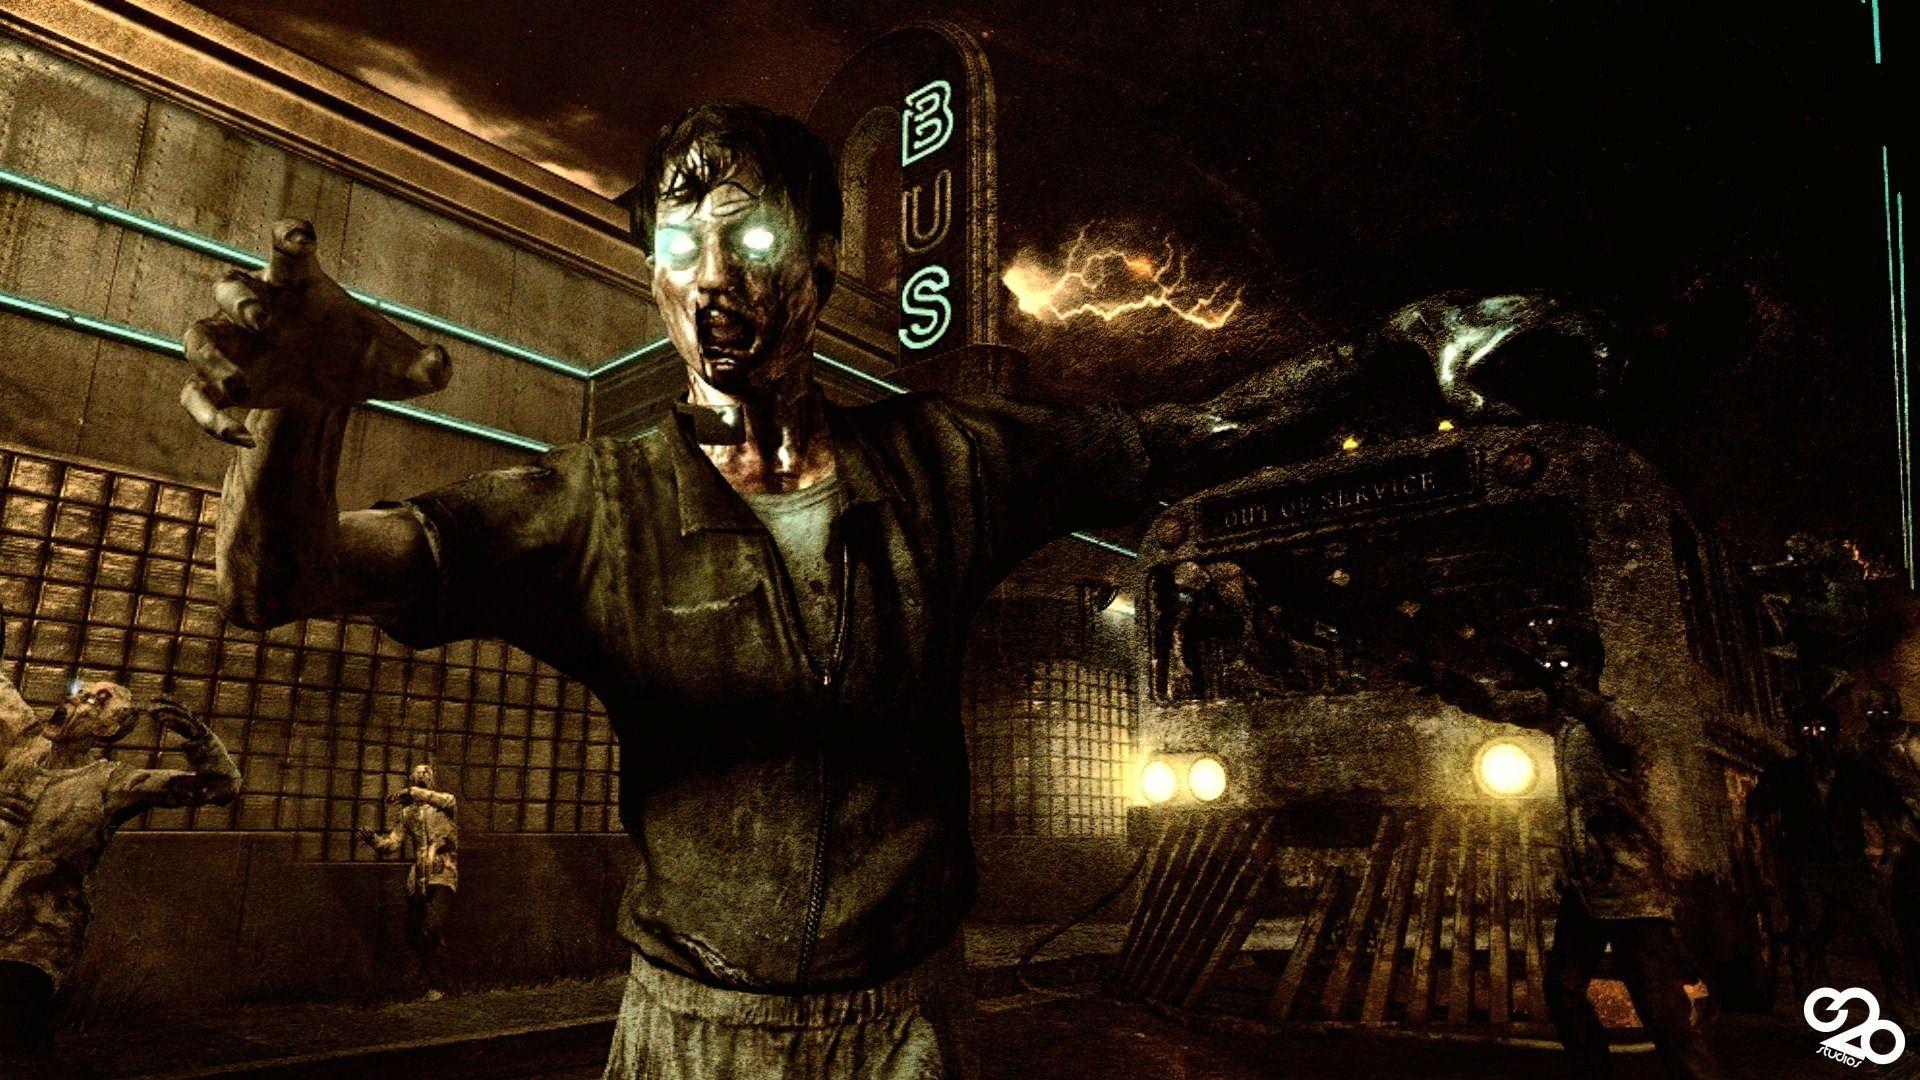 Wallpaper For > Black Ops 2 Zombies Wallpaper 1920x1080